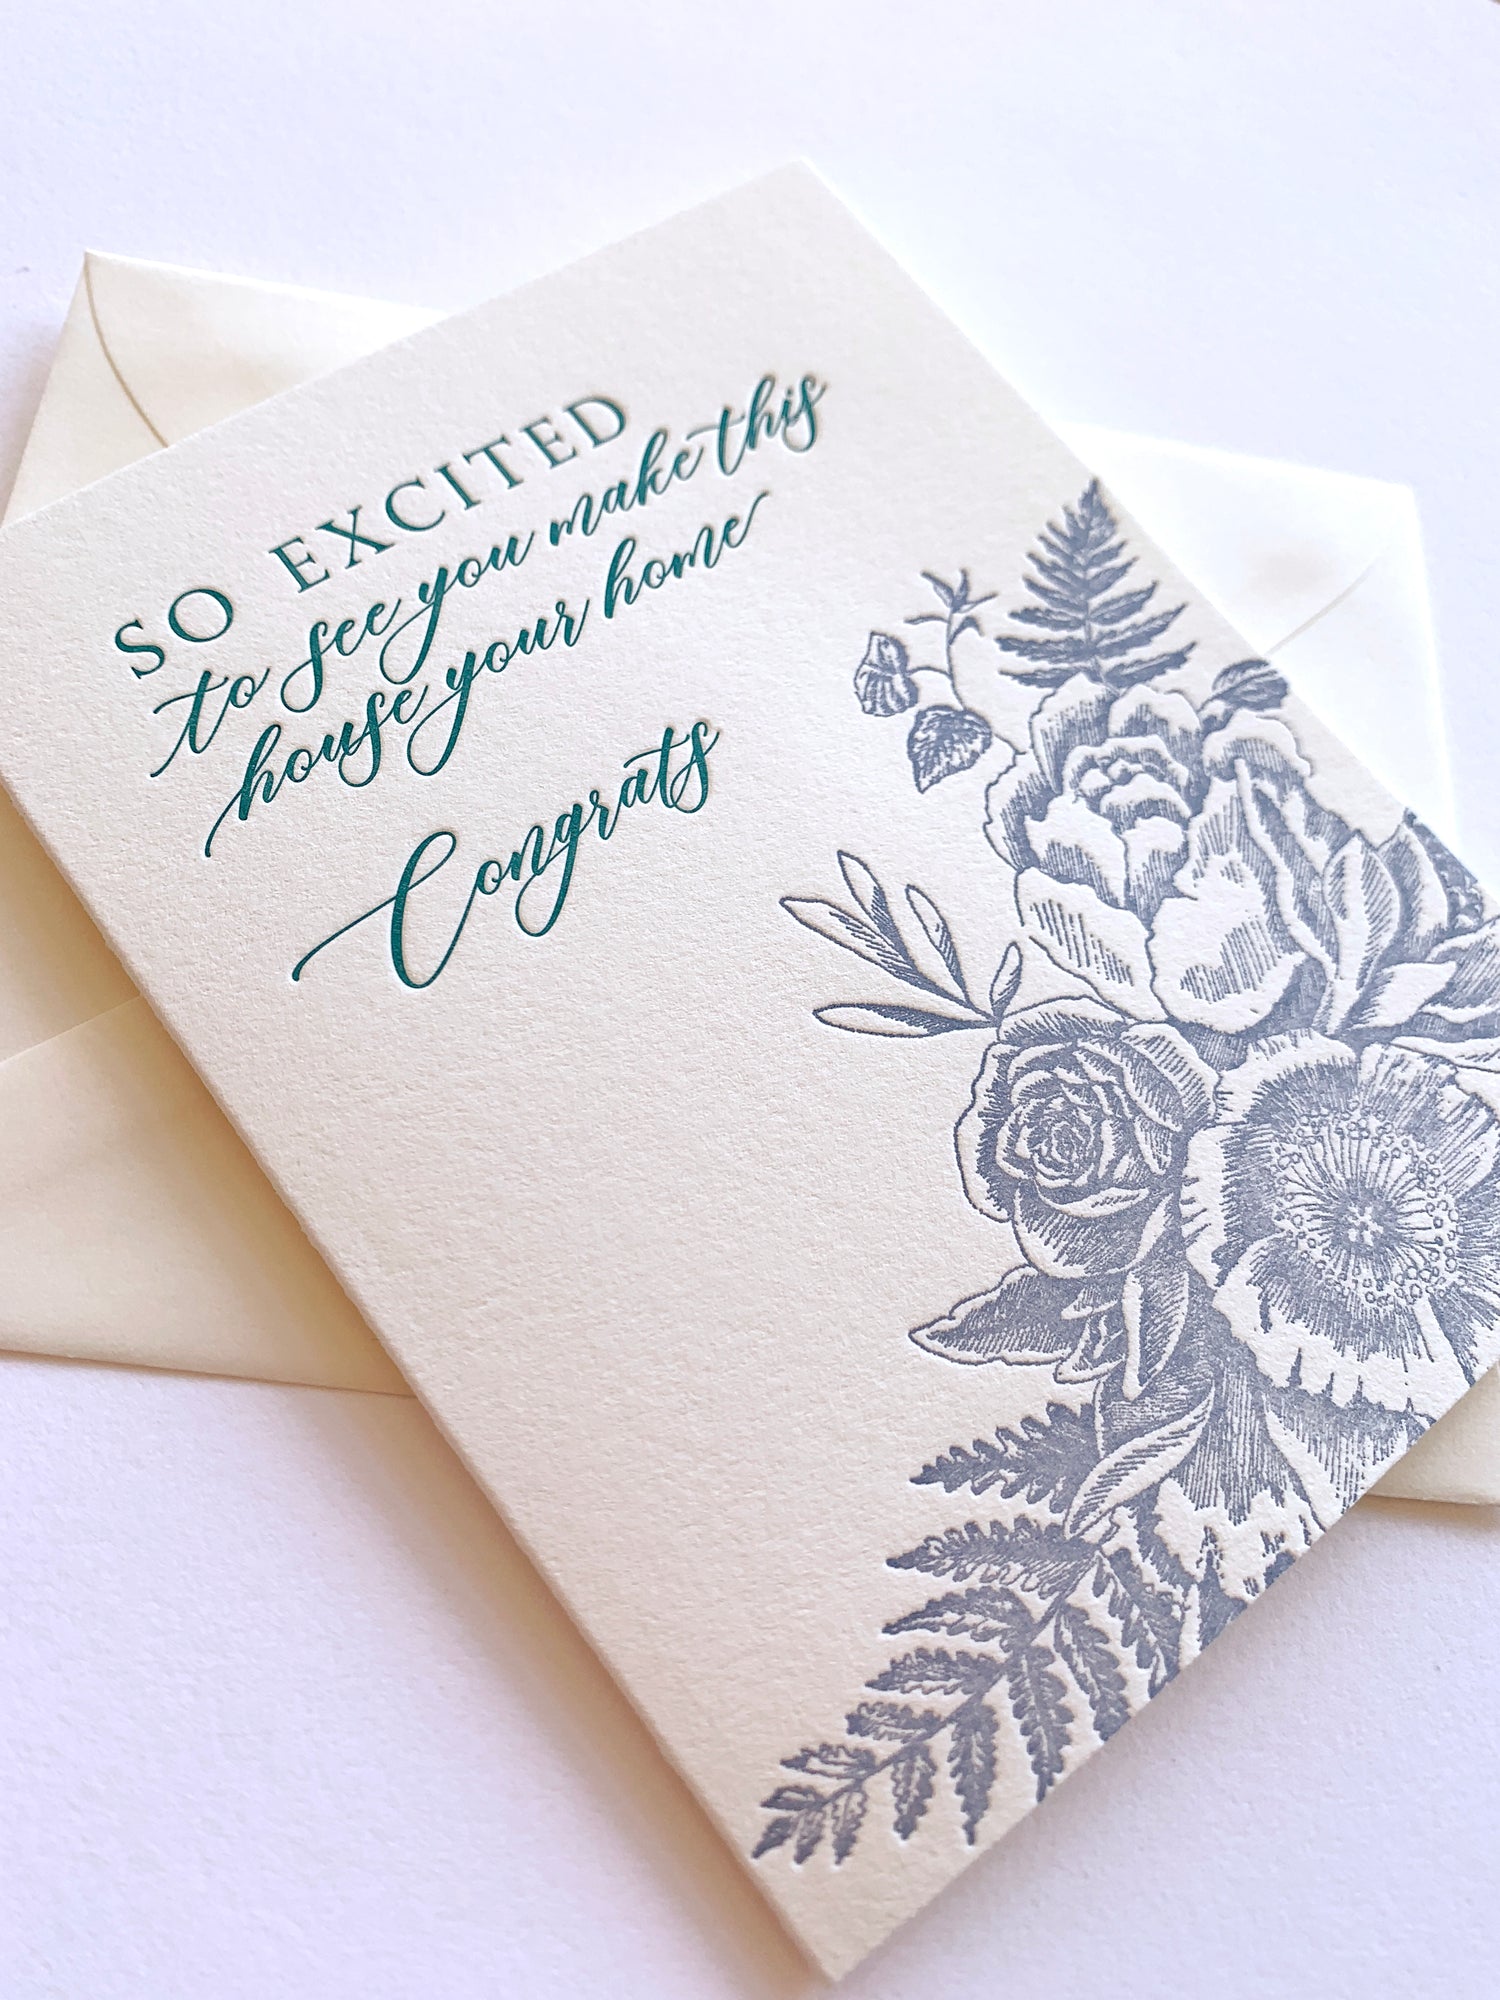 Letterpress new home card with florals that says "So excited to see you make this house your home congrats" by Rust Belt Love